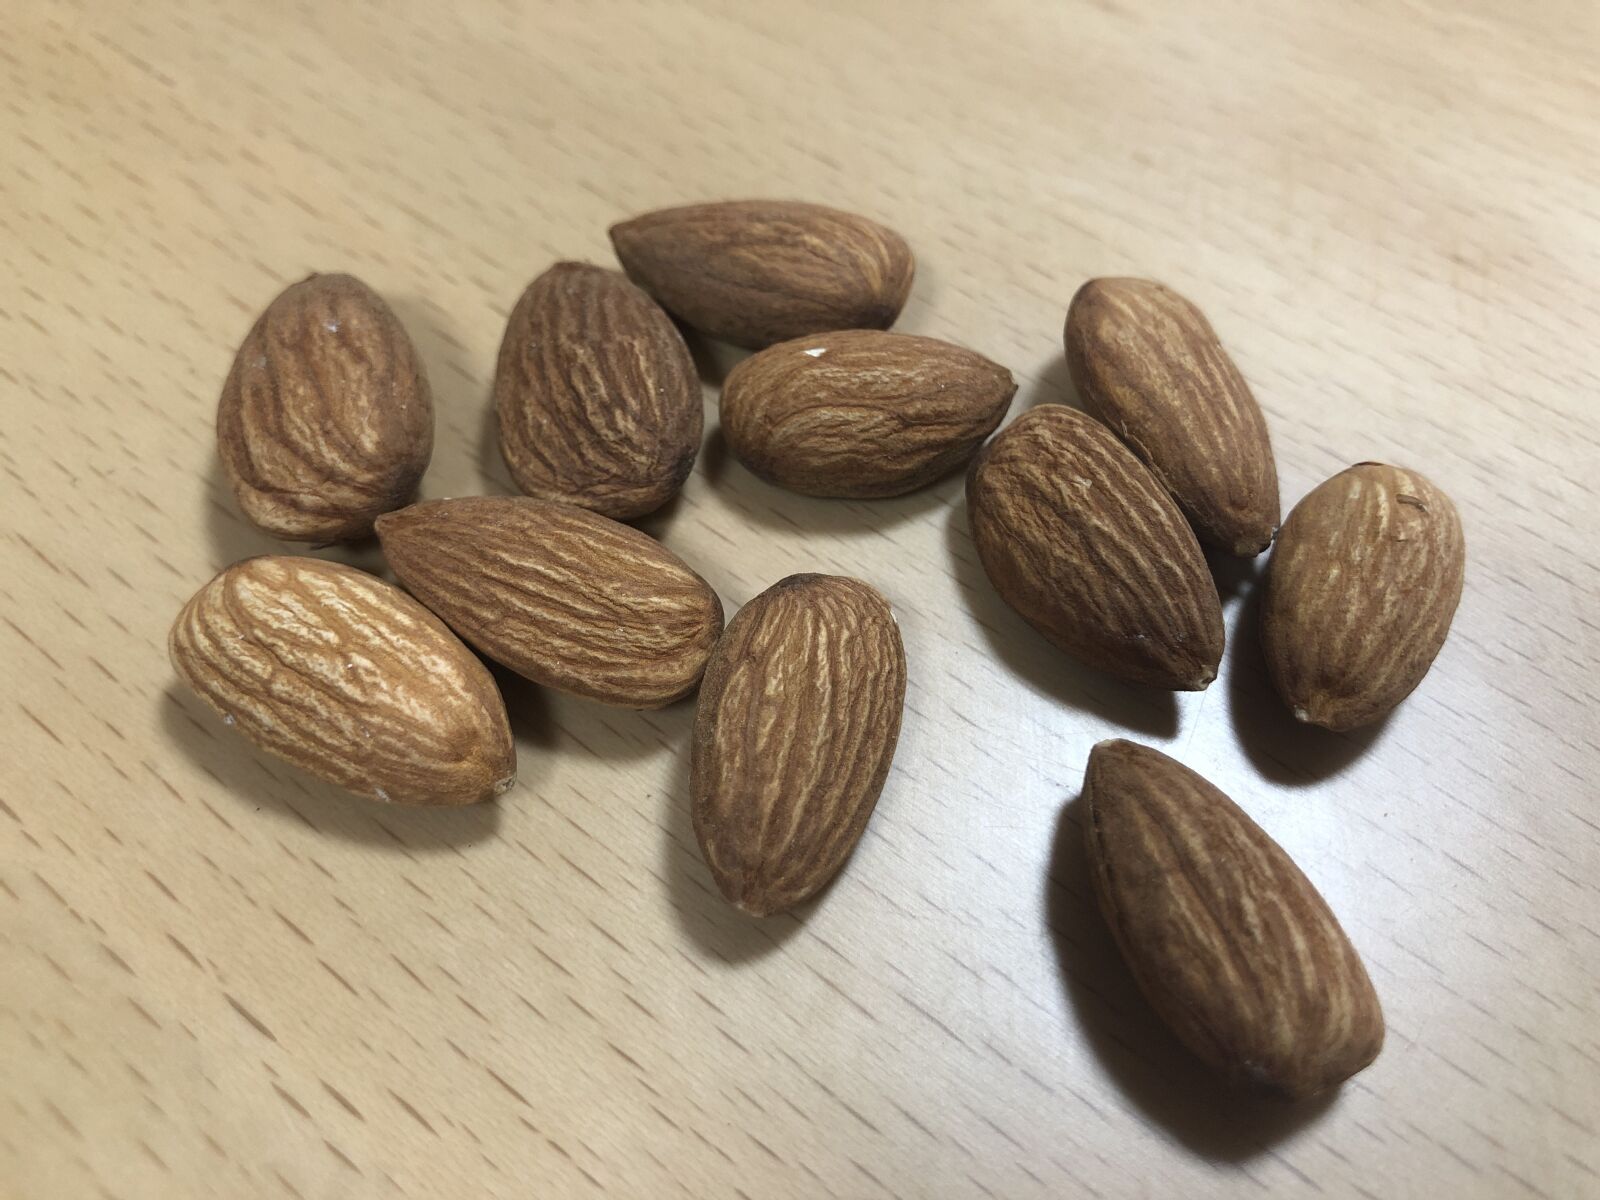 Apple iPhone 8 sample photo. Almond, nuts, healthy photography